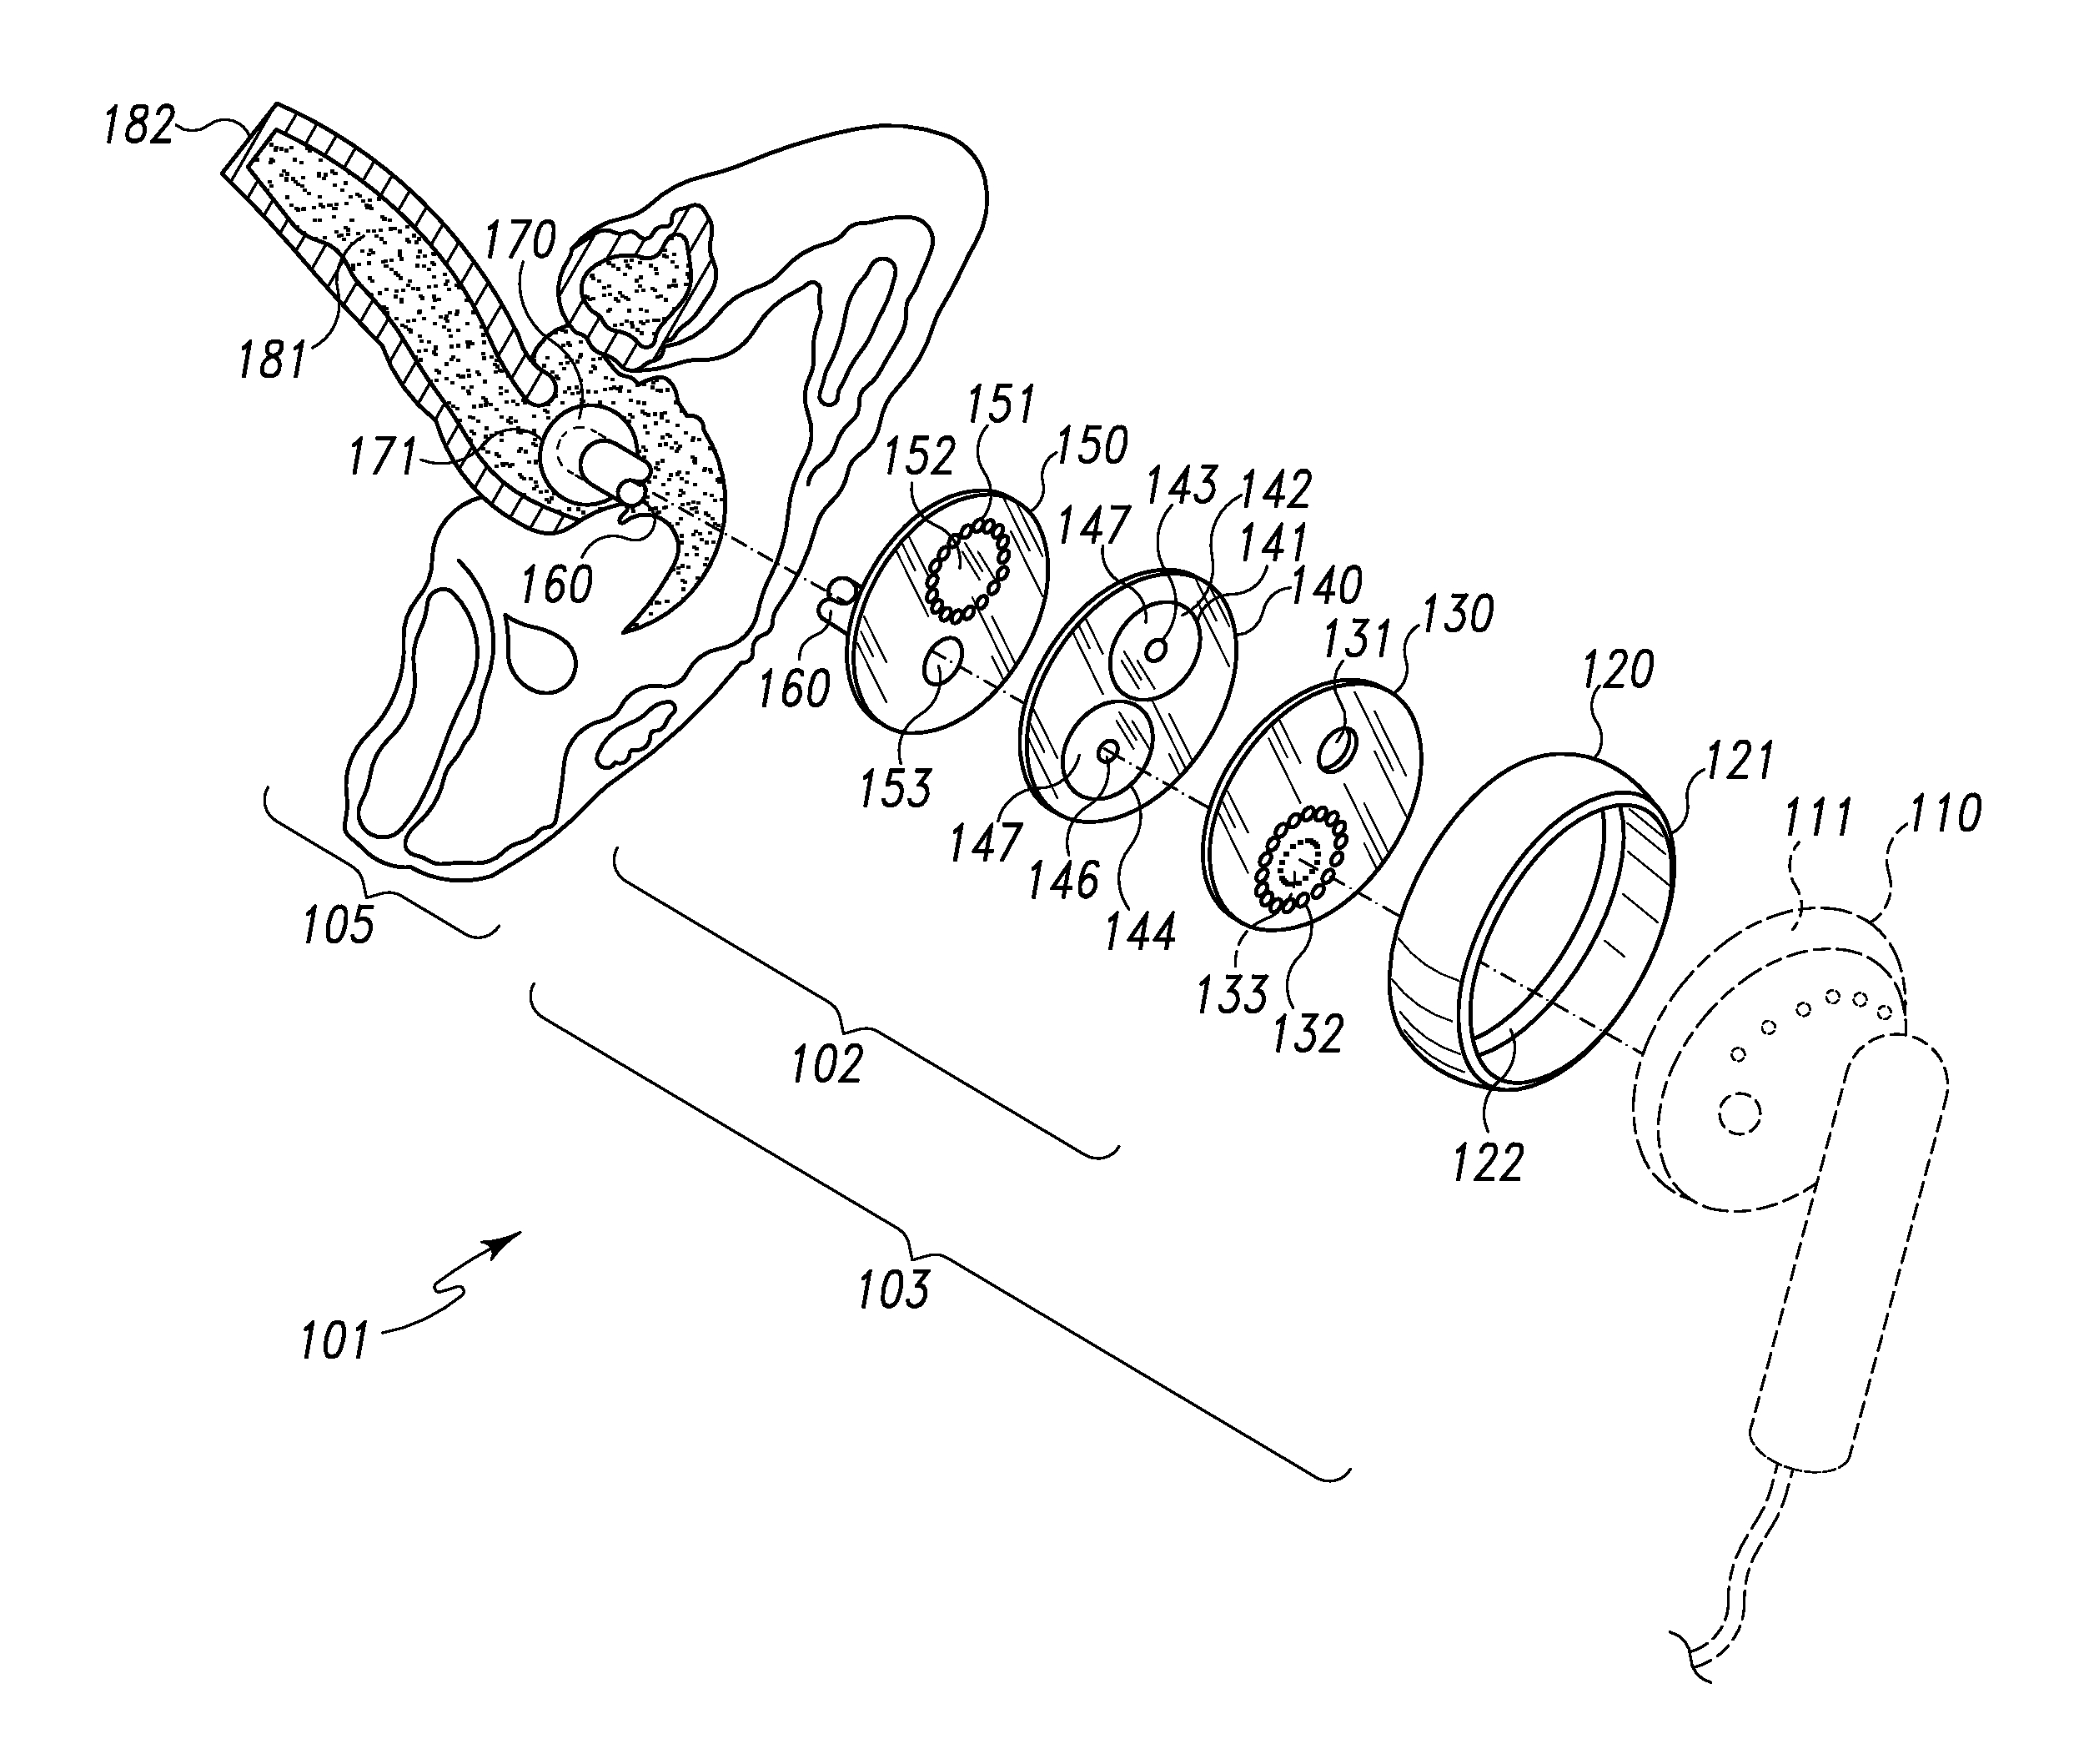 Diaphonic acoustic transduction coupler and ear bud